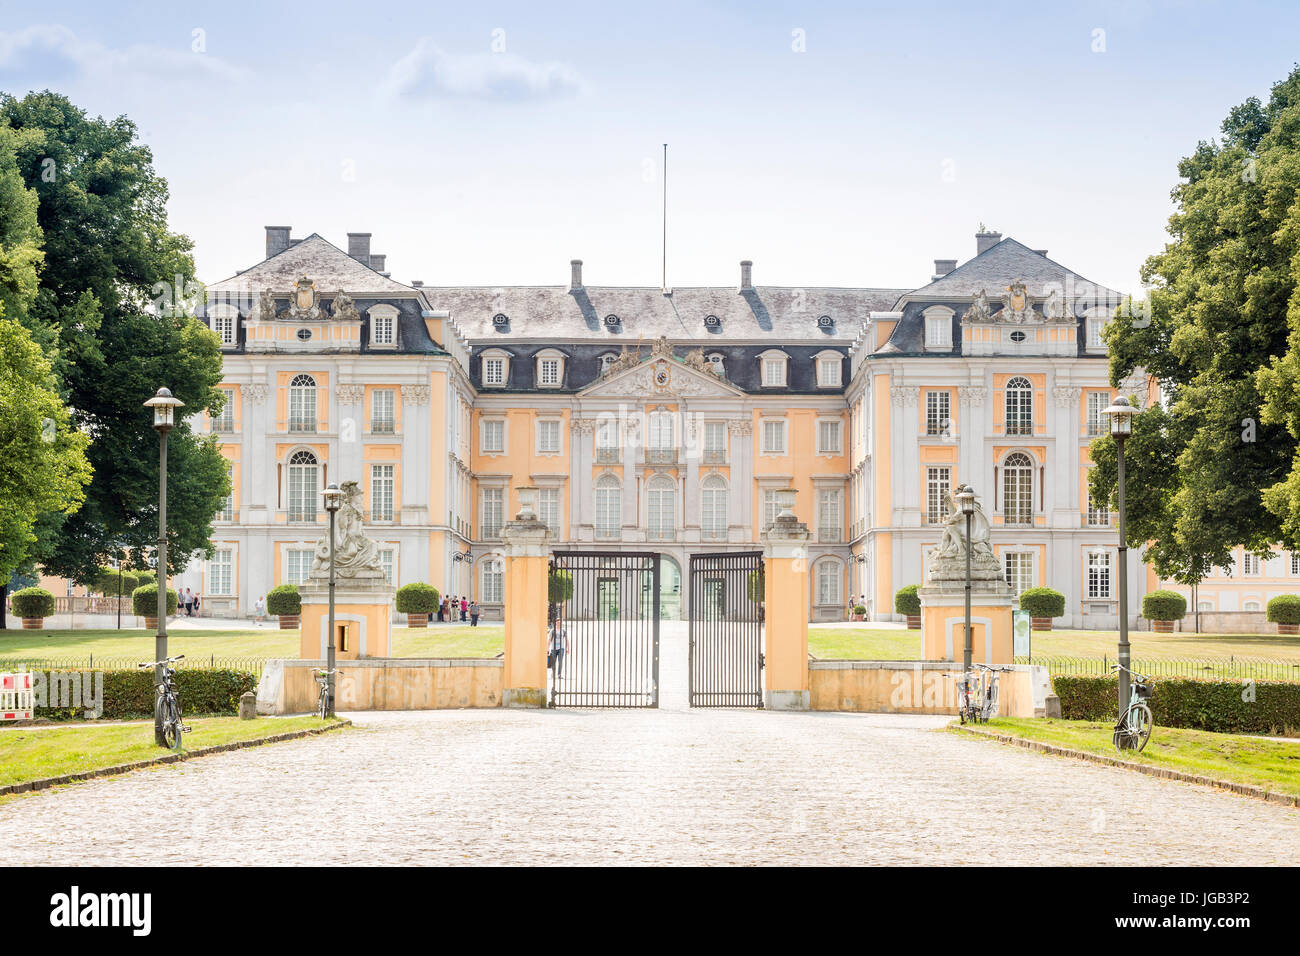 Augustusburg Palace in Bruhl represents one of the first examples of Rococo creations in Germany. Stock Photo